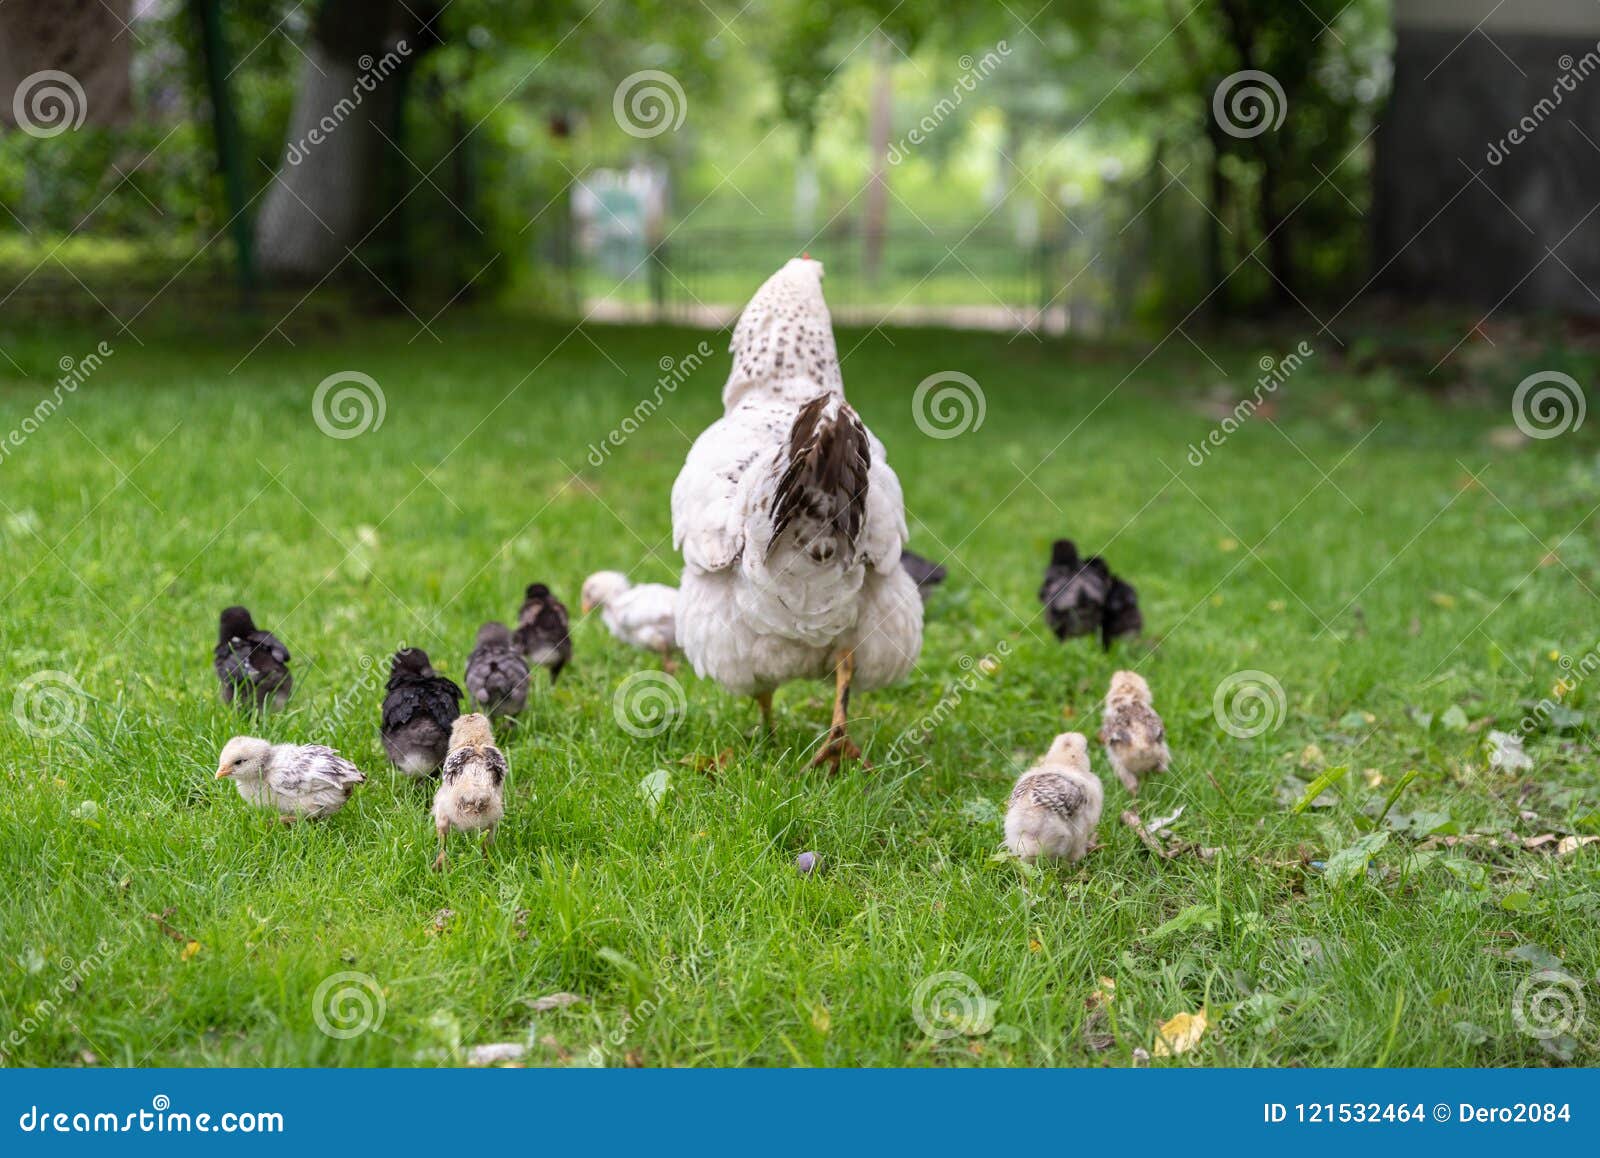 broody hen walk with her chicks in the yard